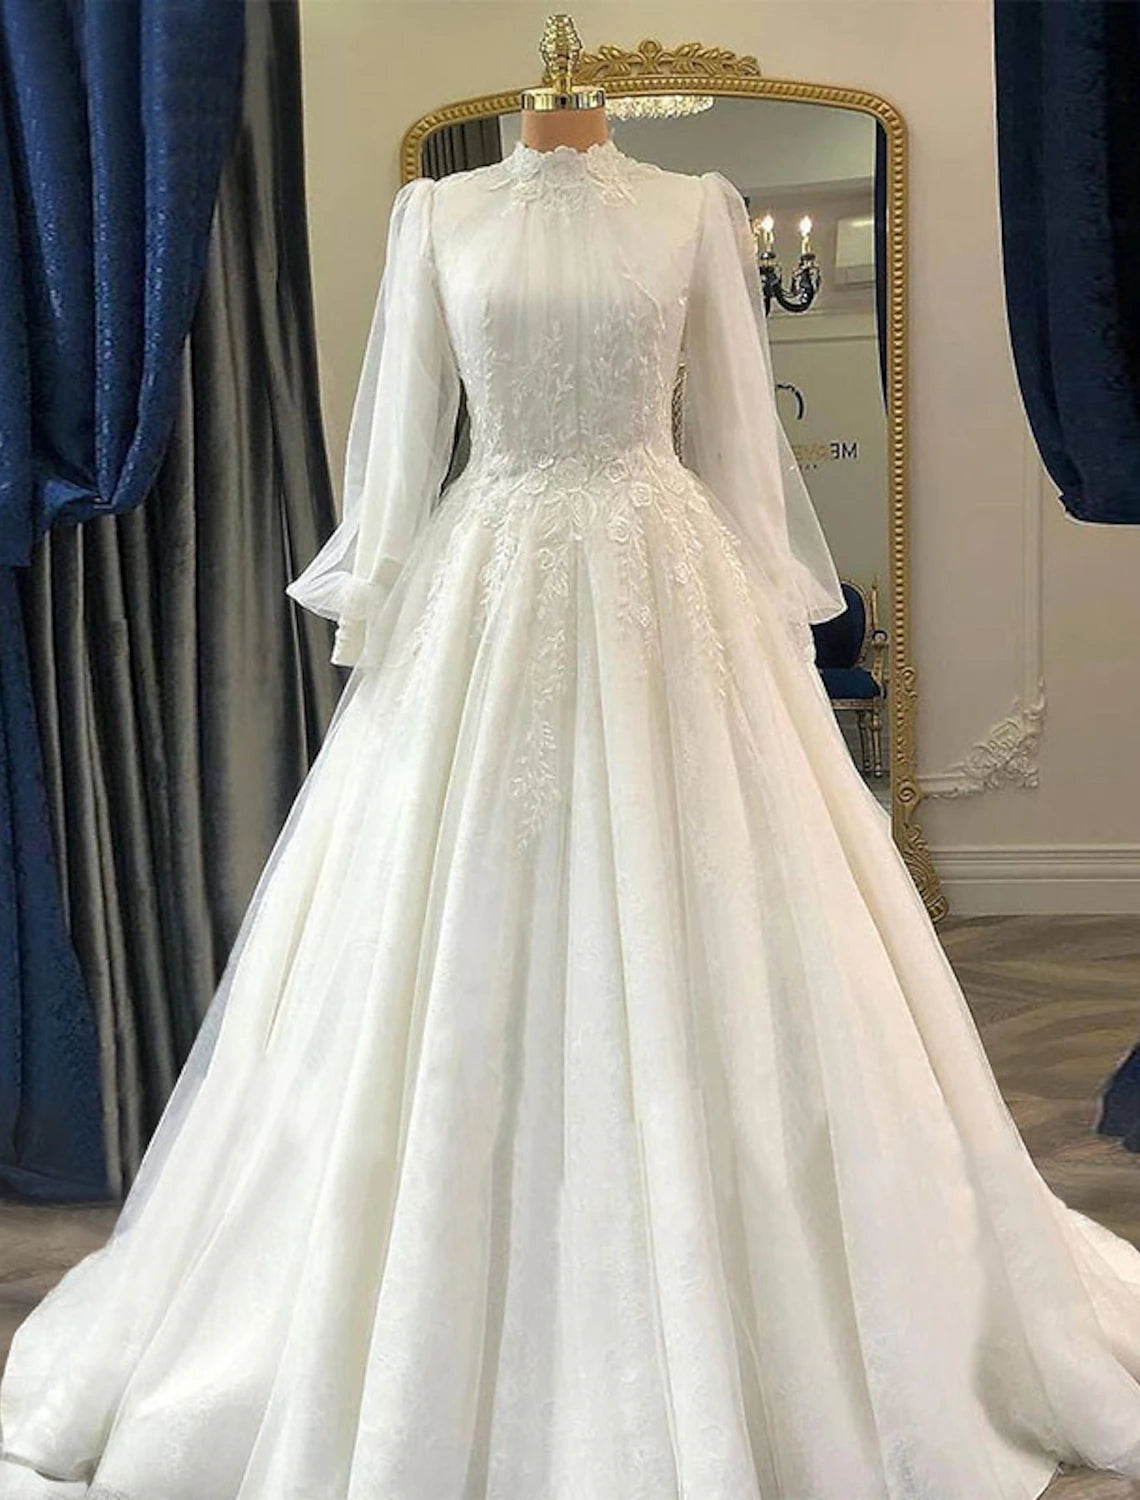 Engagement Vintage 1940s / 1950s Formal Wedding Dresses Ball Gown High Neck Long Sleeve Court Train Lace Bridal Gowns With Pleats Appliques